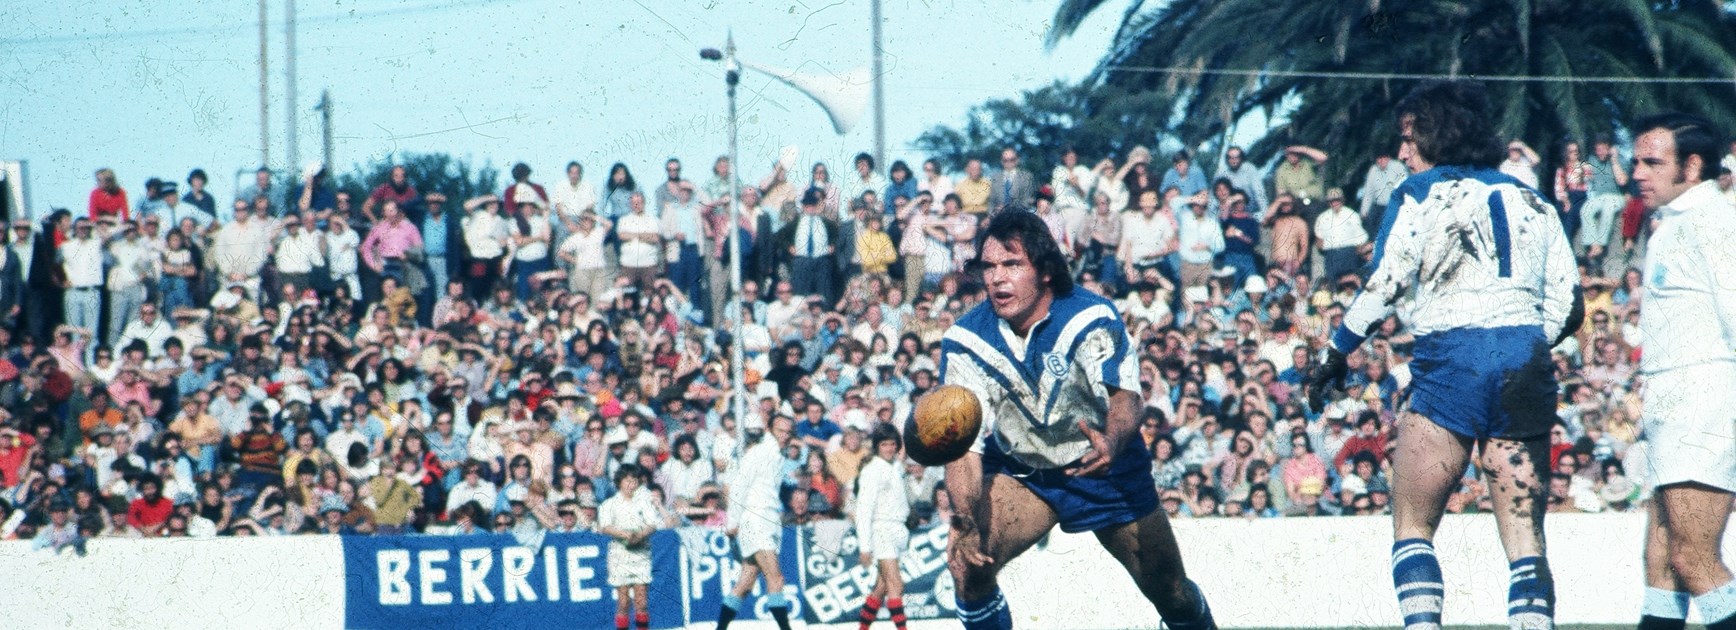 Bill Noonan was one of the toughest and most respected players of his era